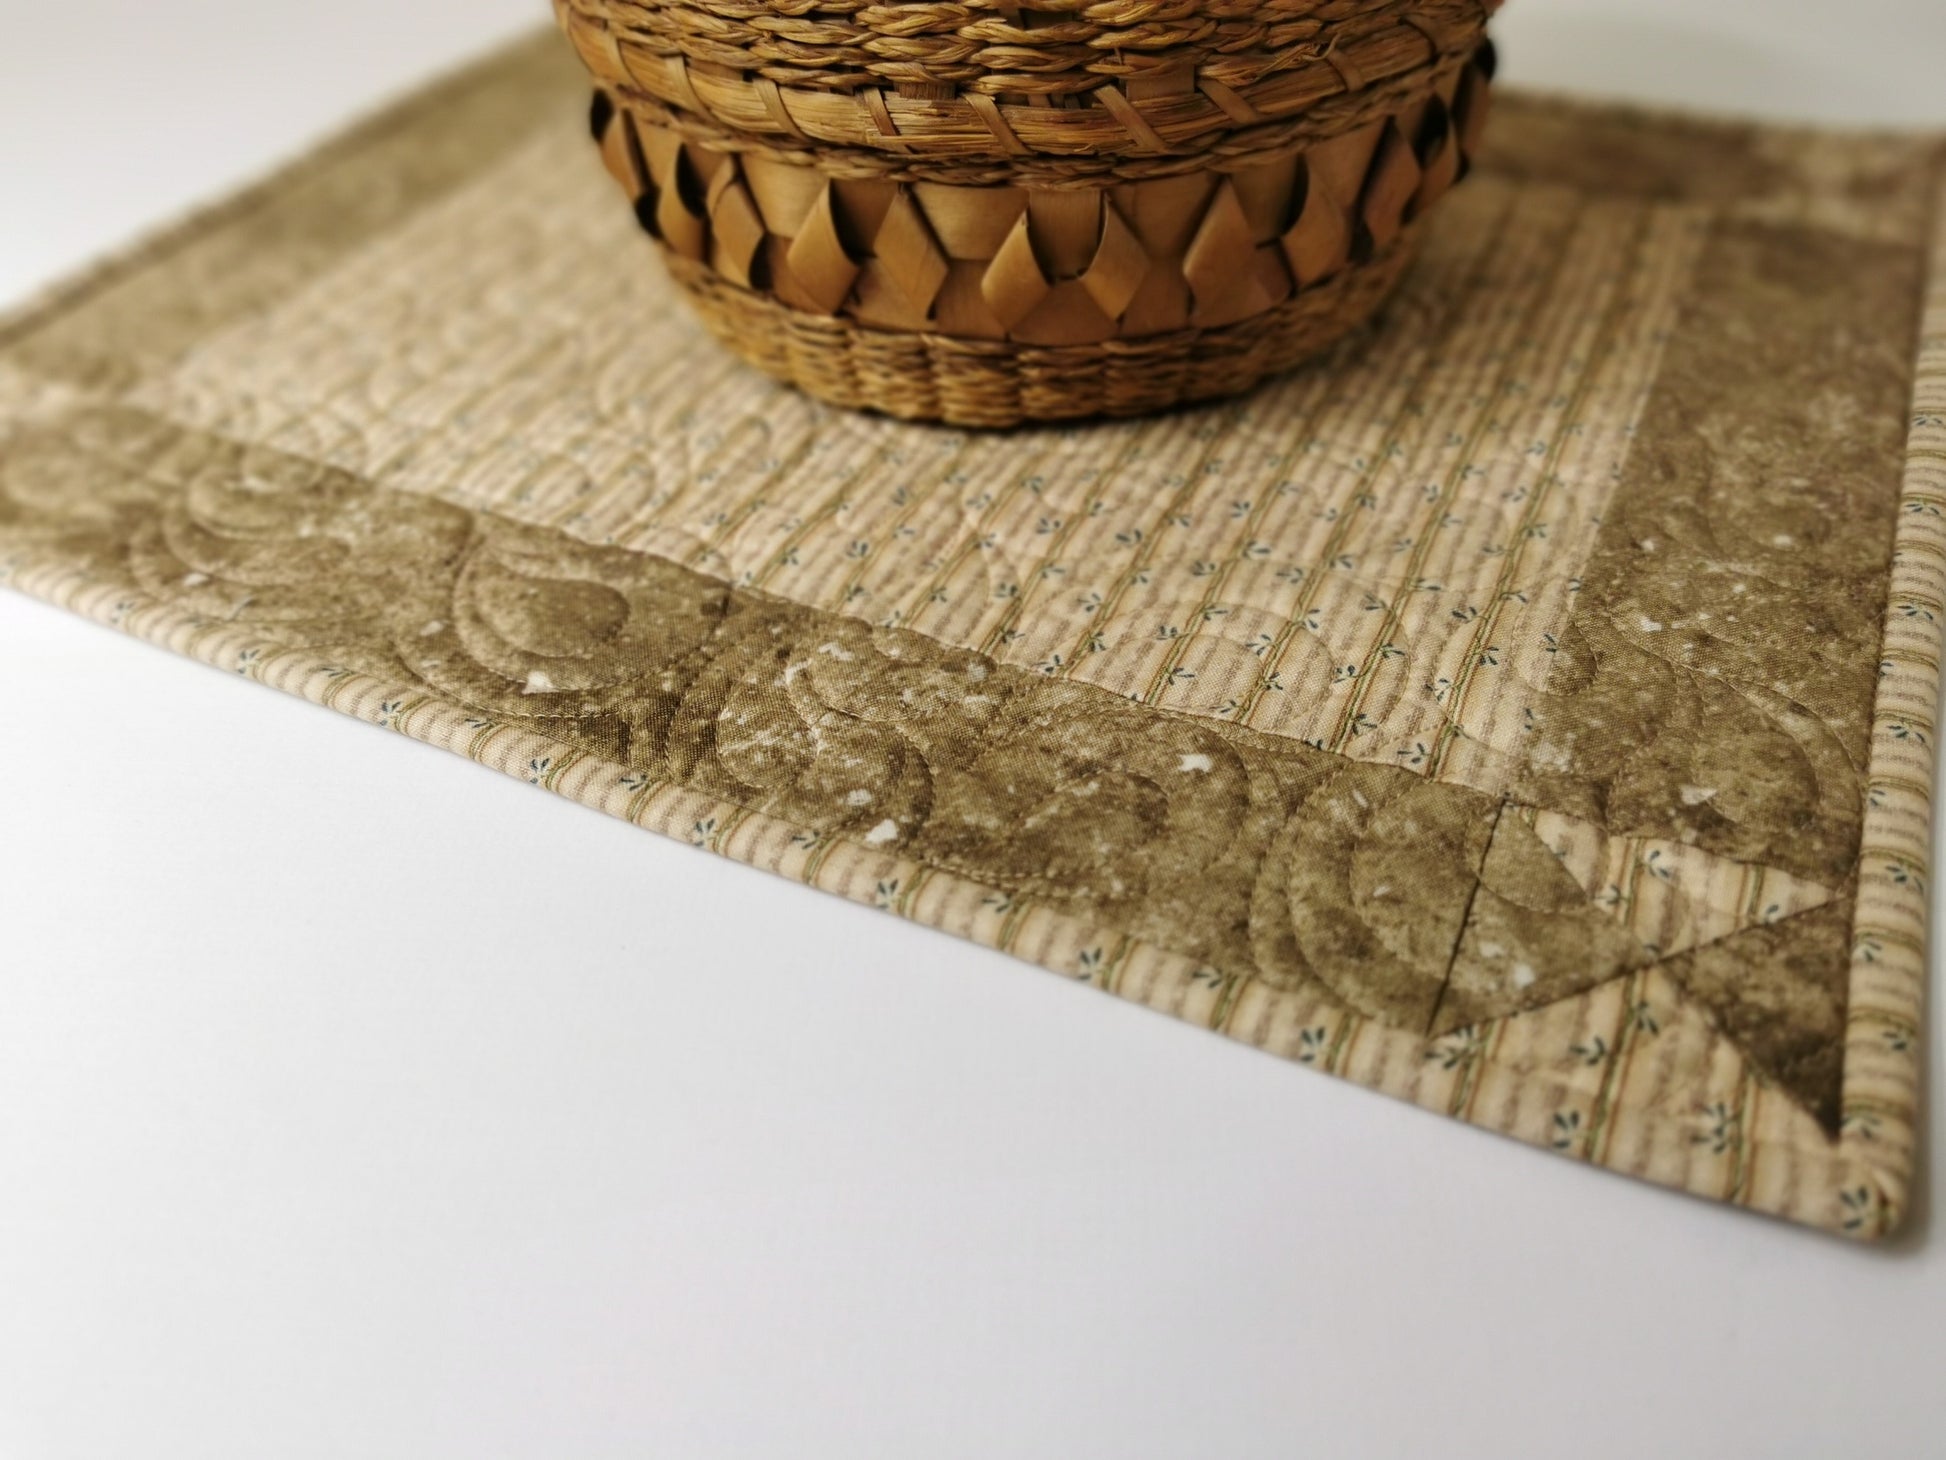 Quilted placemat is shown with a wicker basket sitting on it. Neutral beige fabrics with simple piecing make these both pretty and practical.